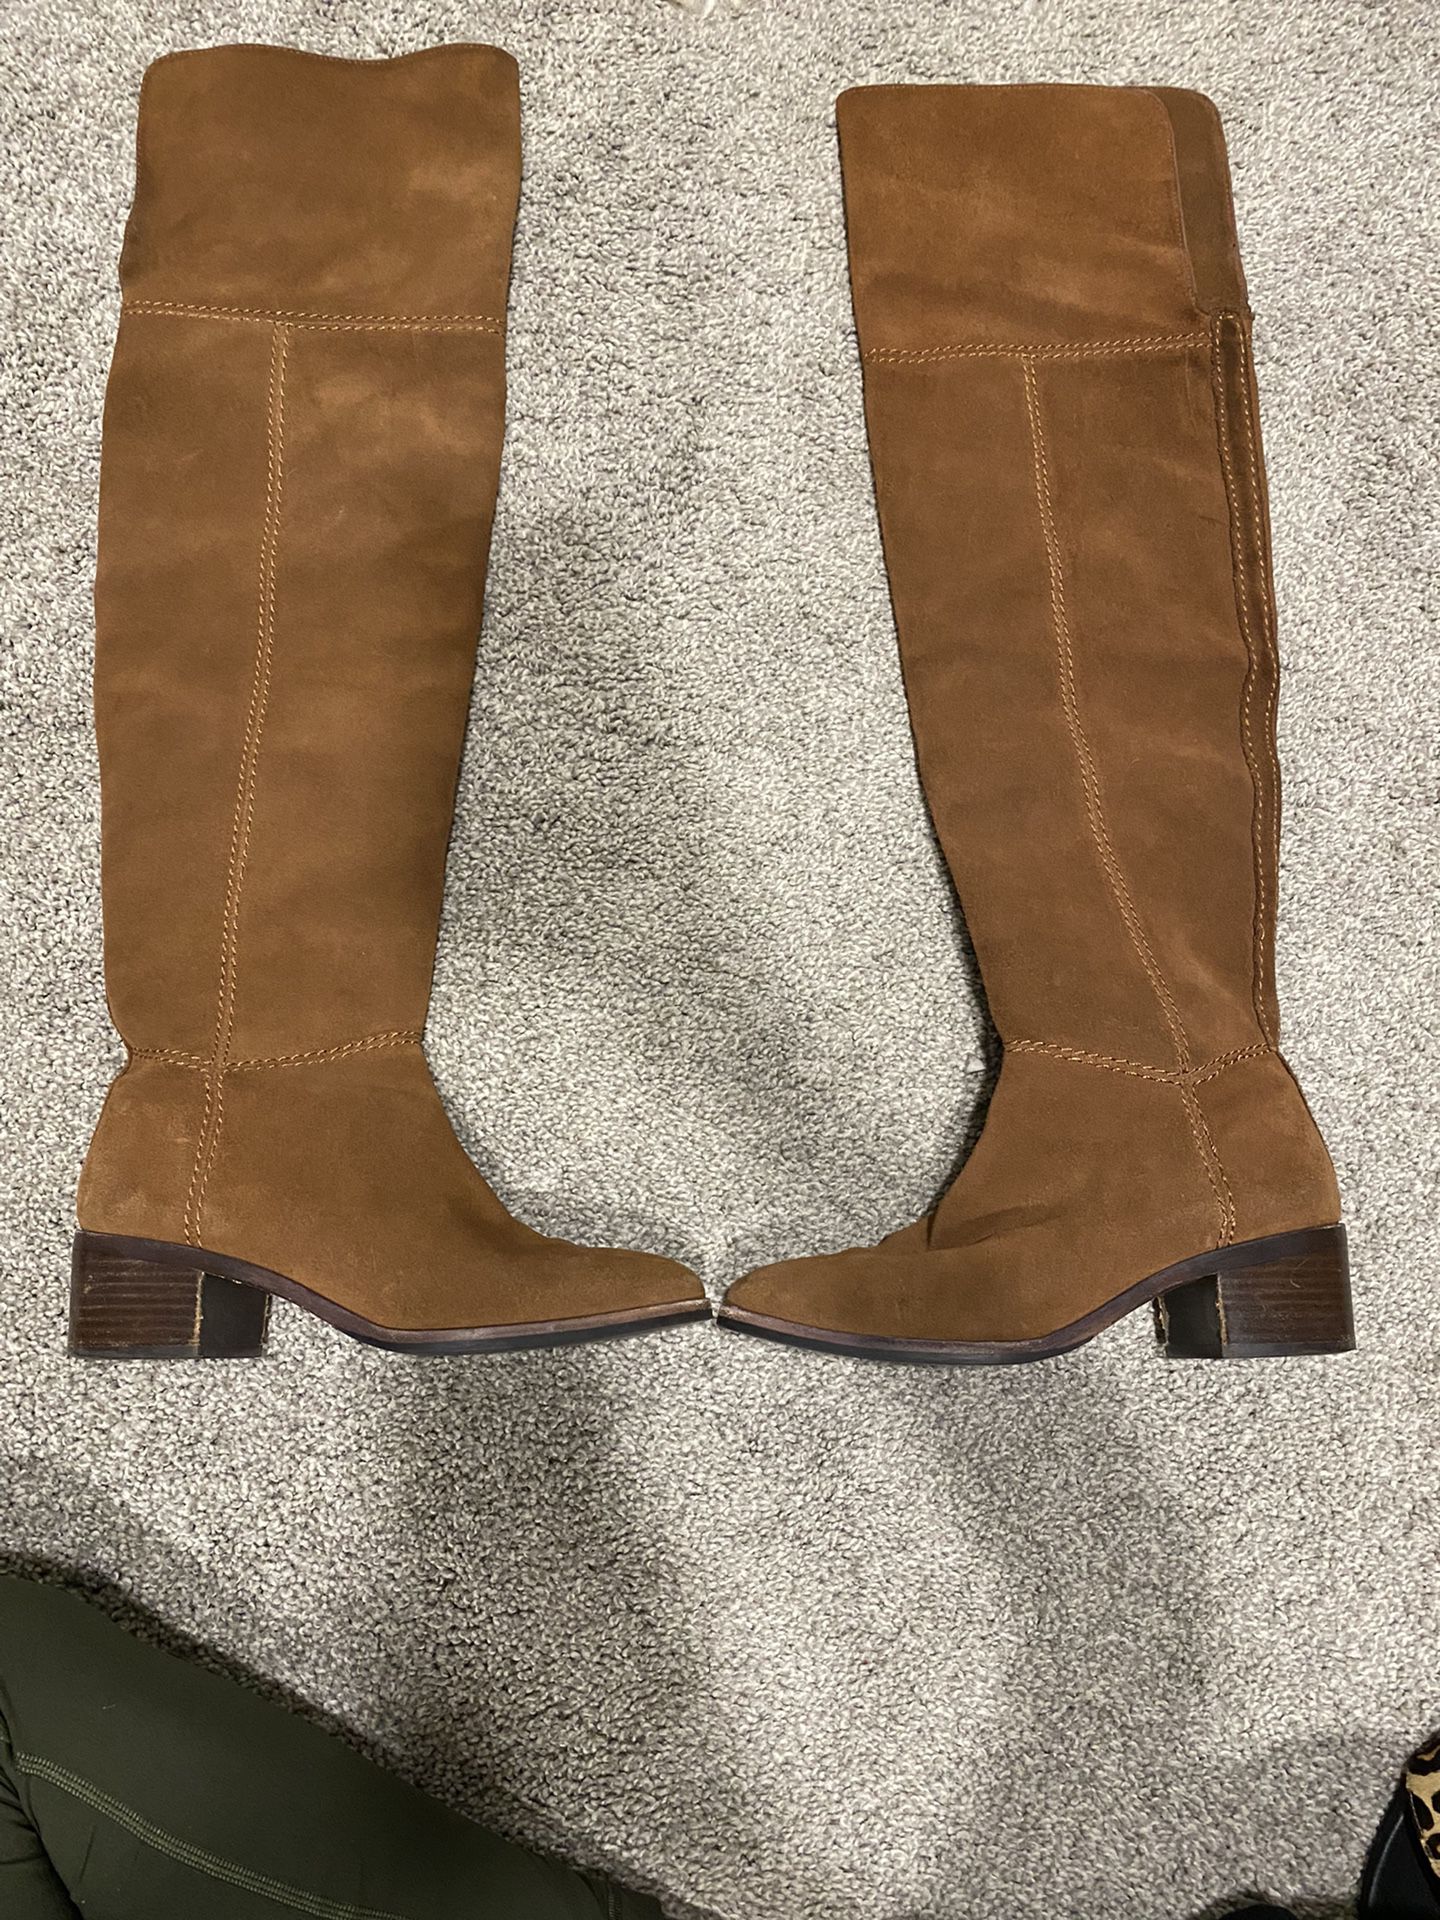 Coach Knee Length Riding Boots